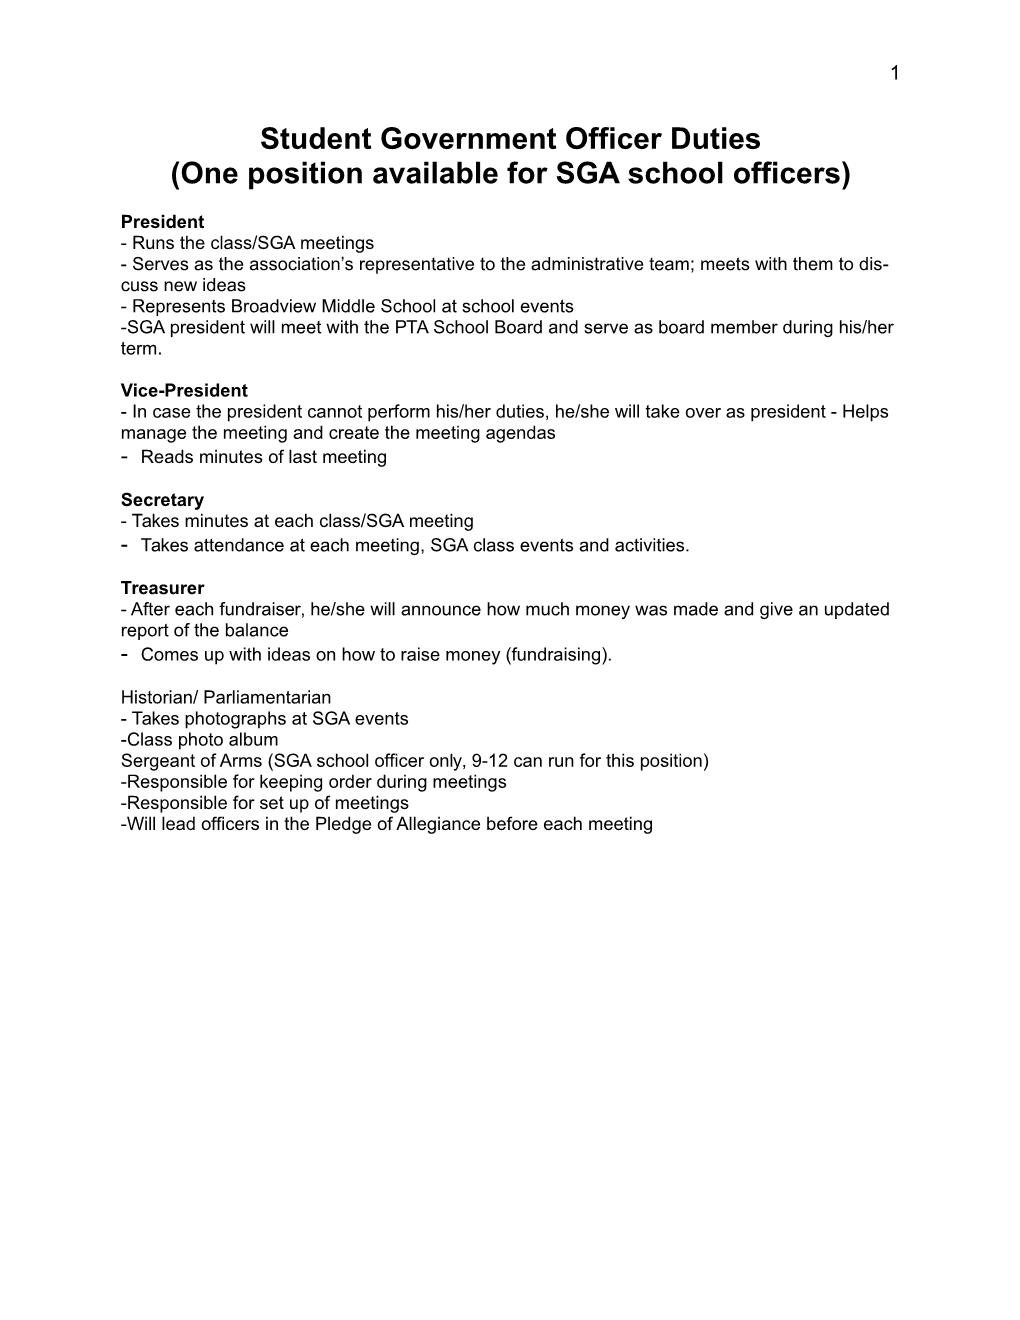 One Position Available for SGA School Officers